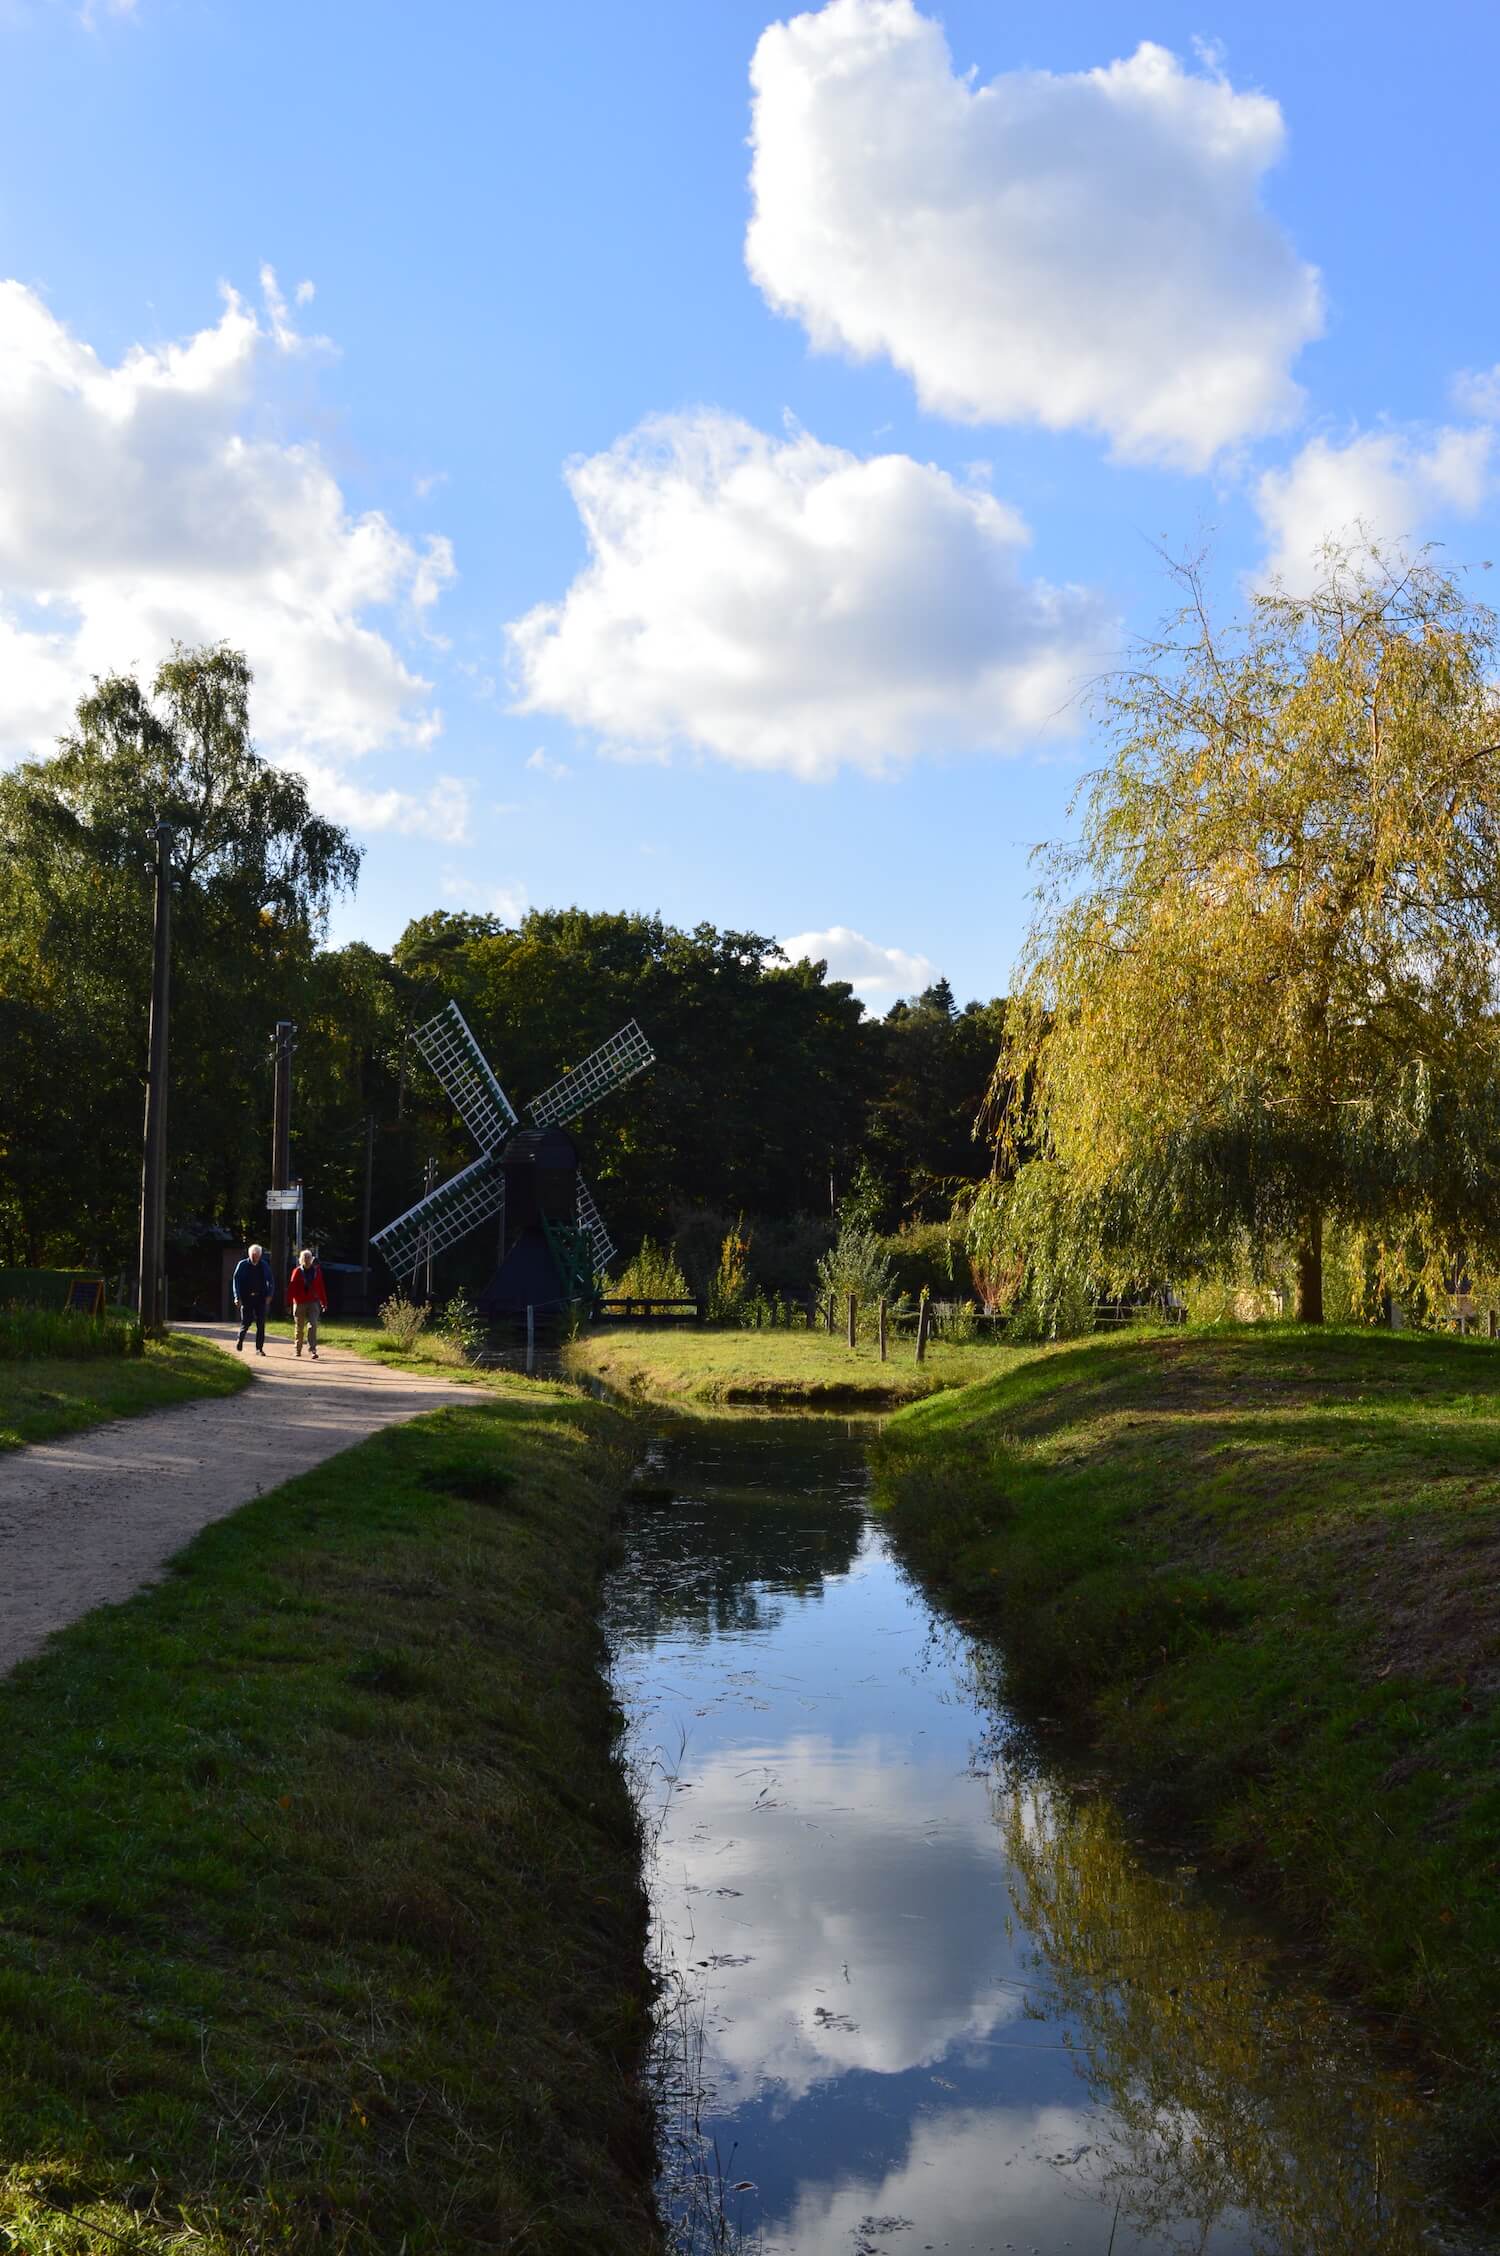 Landscape picture in the open air museum Arnhem, featuring a small canal and a little windmill.